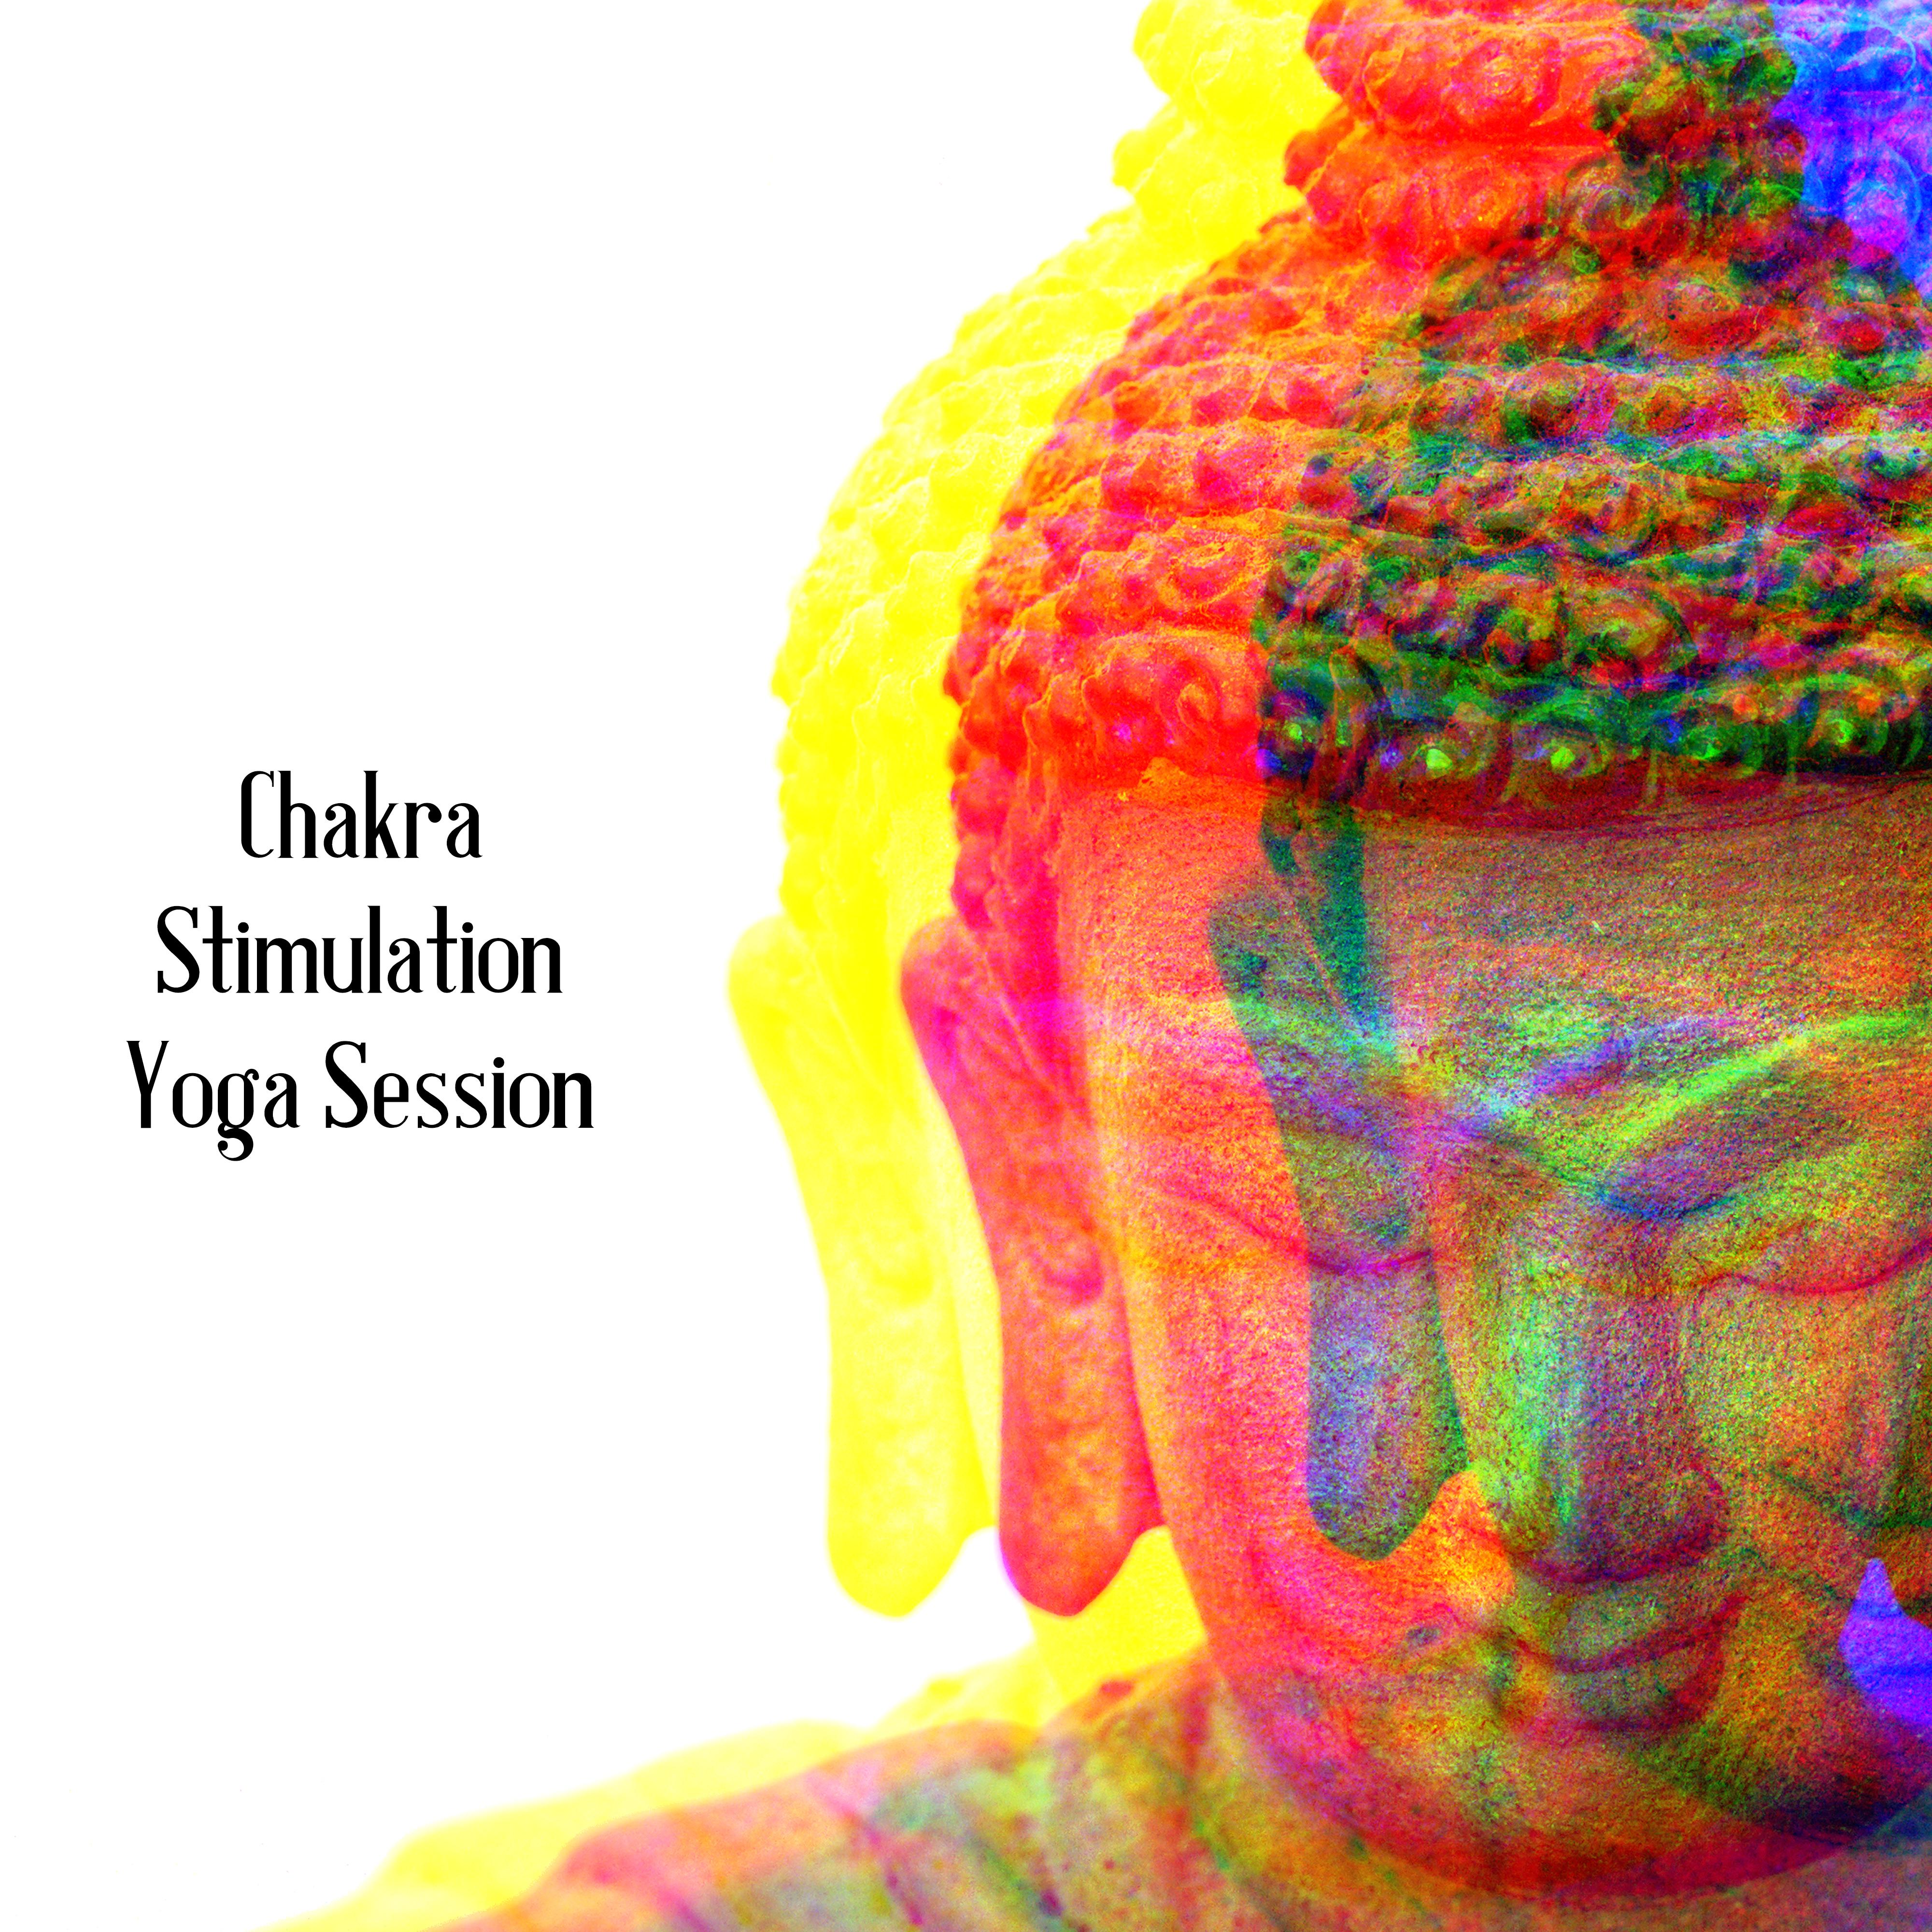 Chakra Stimulation Yoga Session: 15 Meditation & Relaxation Songs for Internal Harmony, Total Stress Relief & Heal Body & Soul